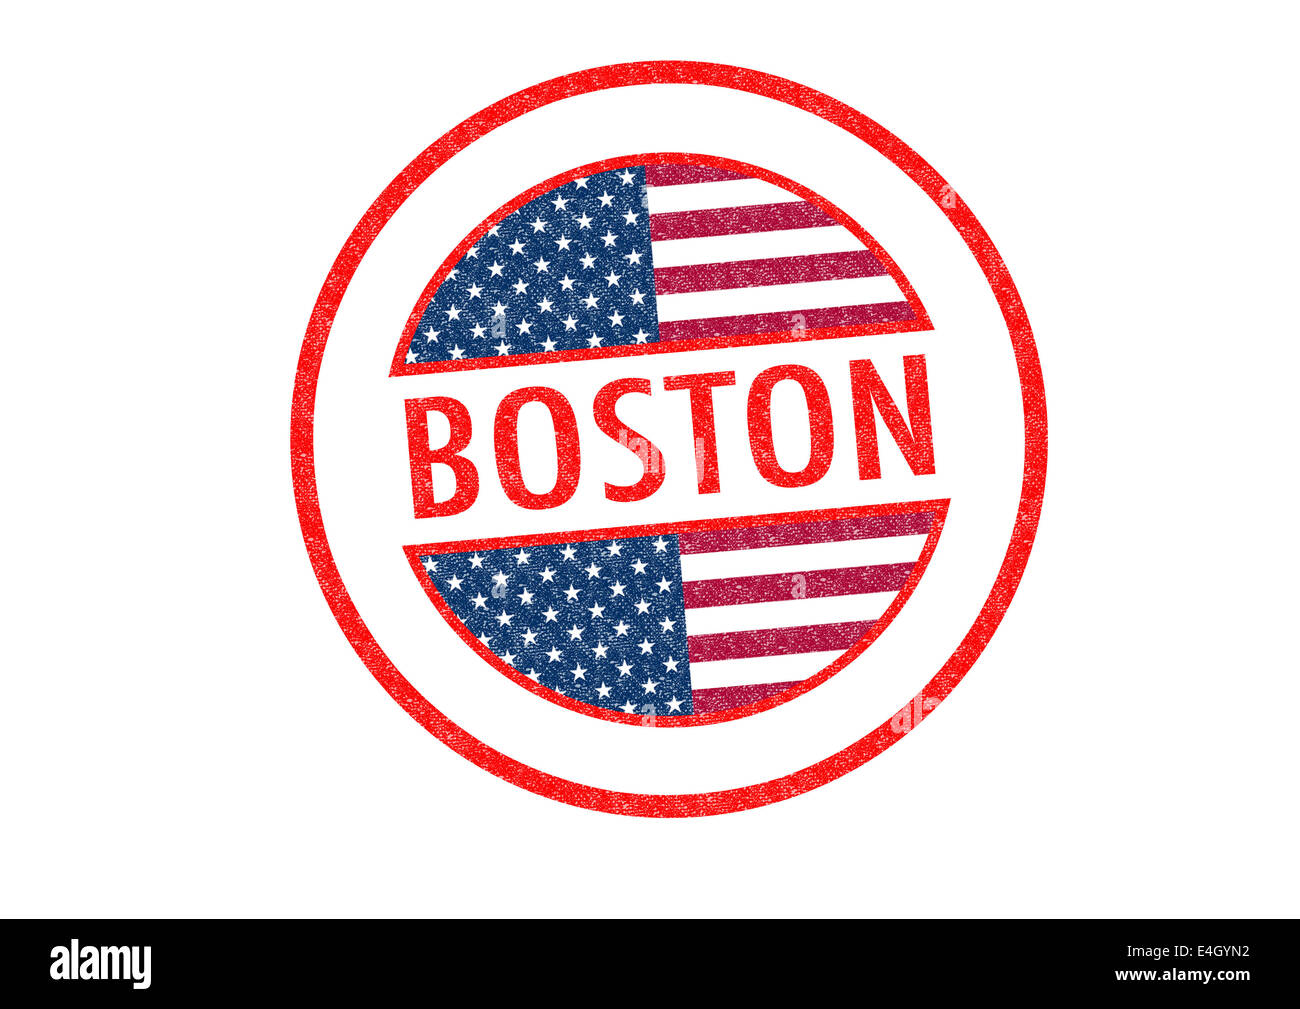 Passport-style BOSTON rubber stamp over a white background. Stock Photo